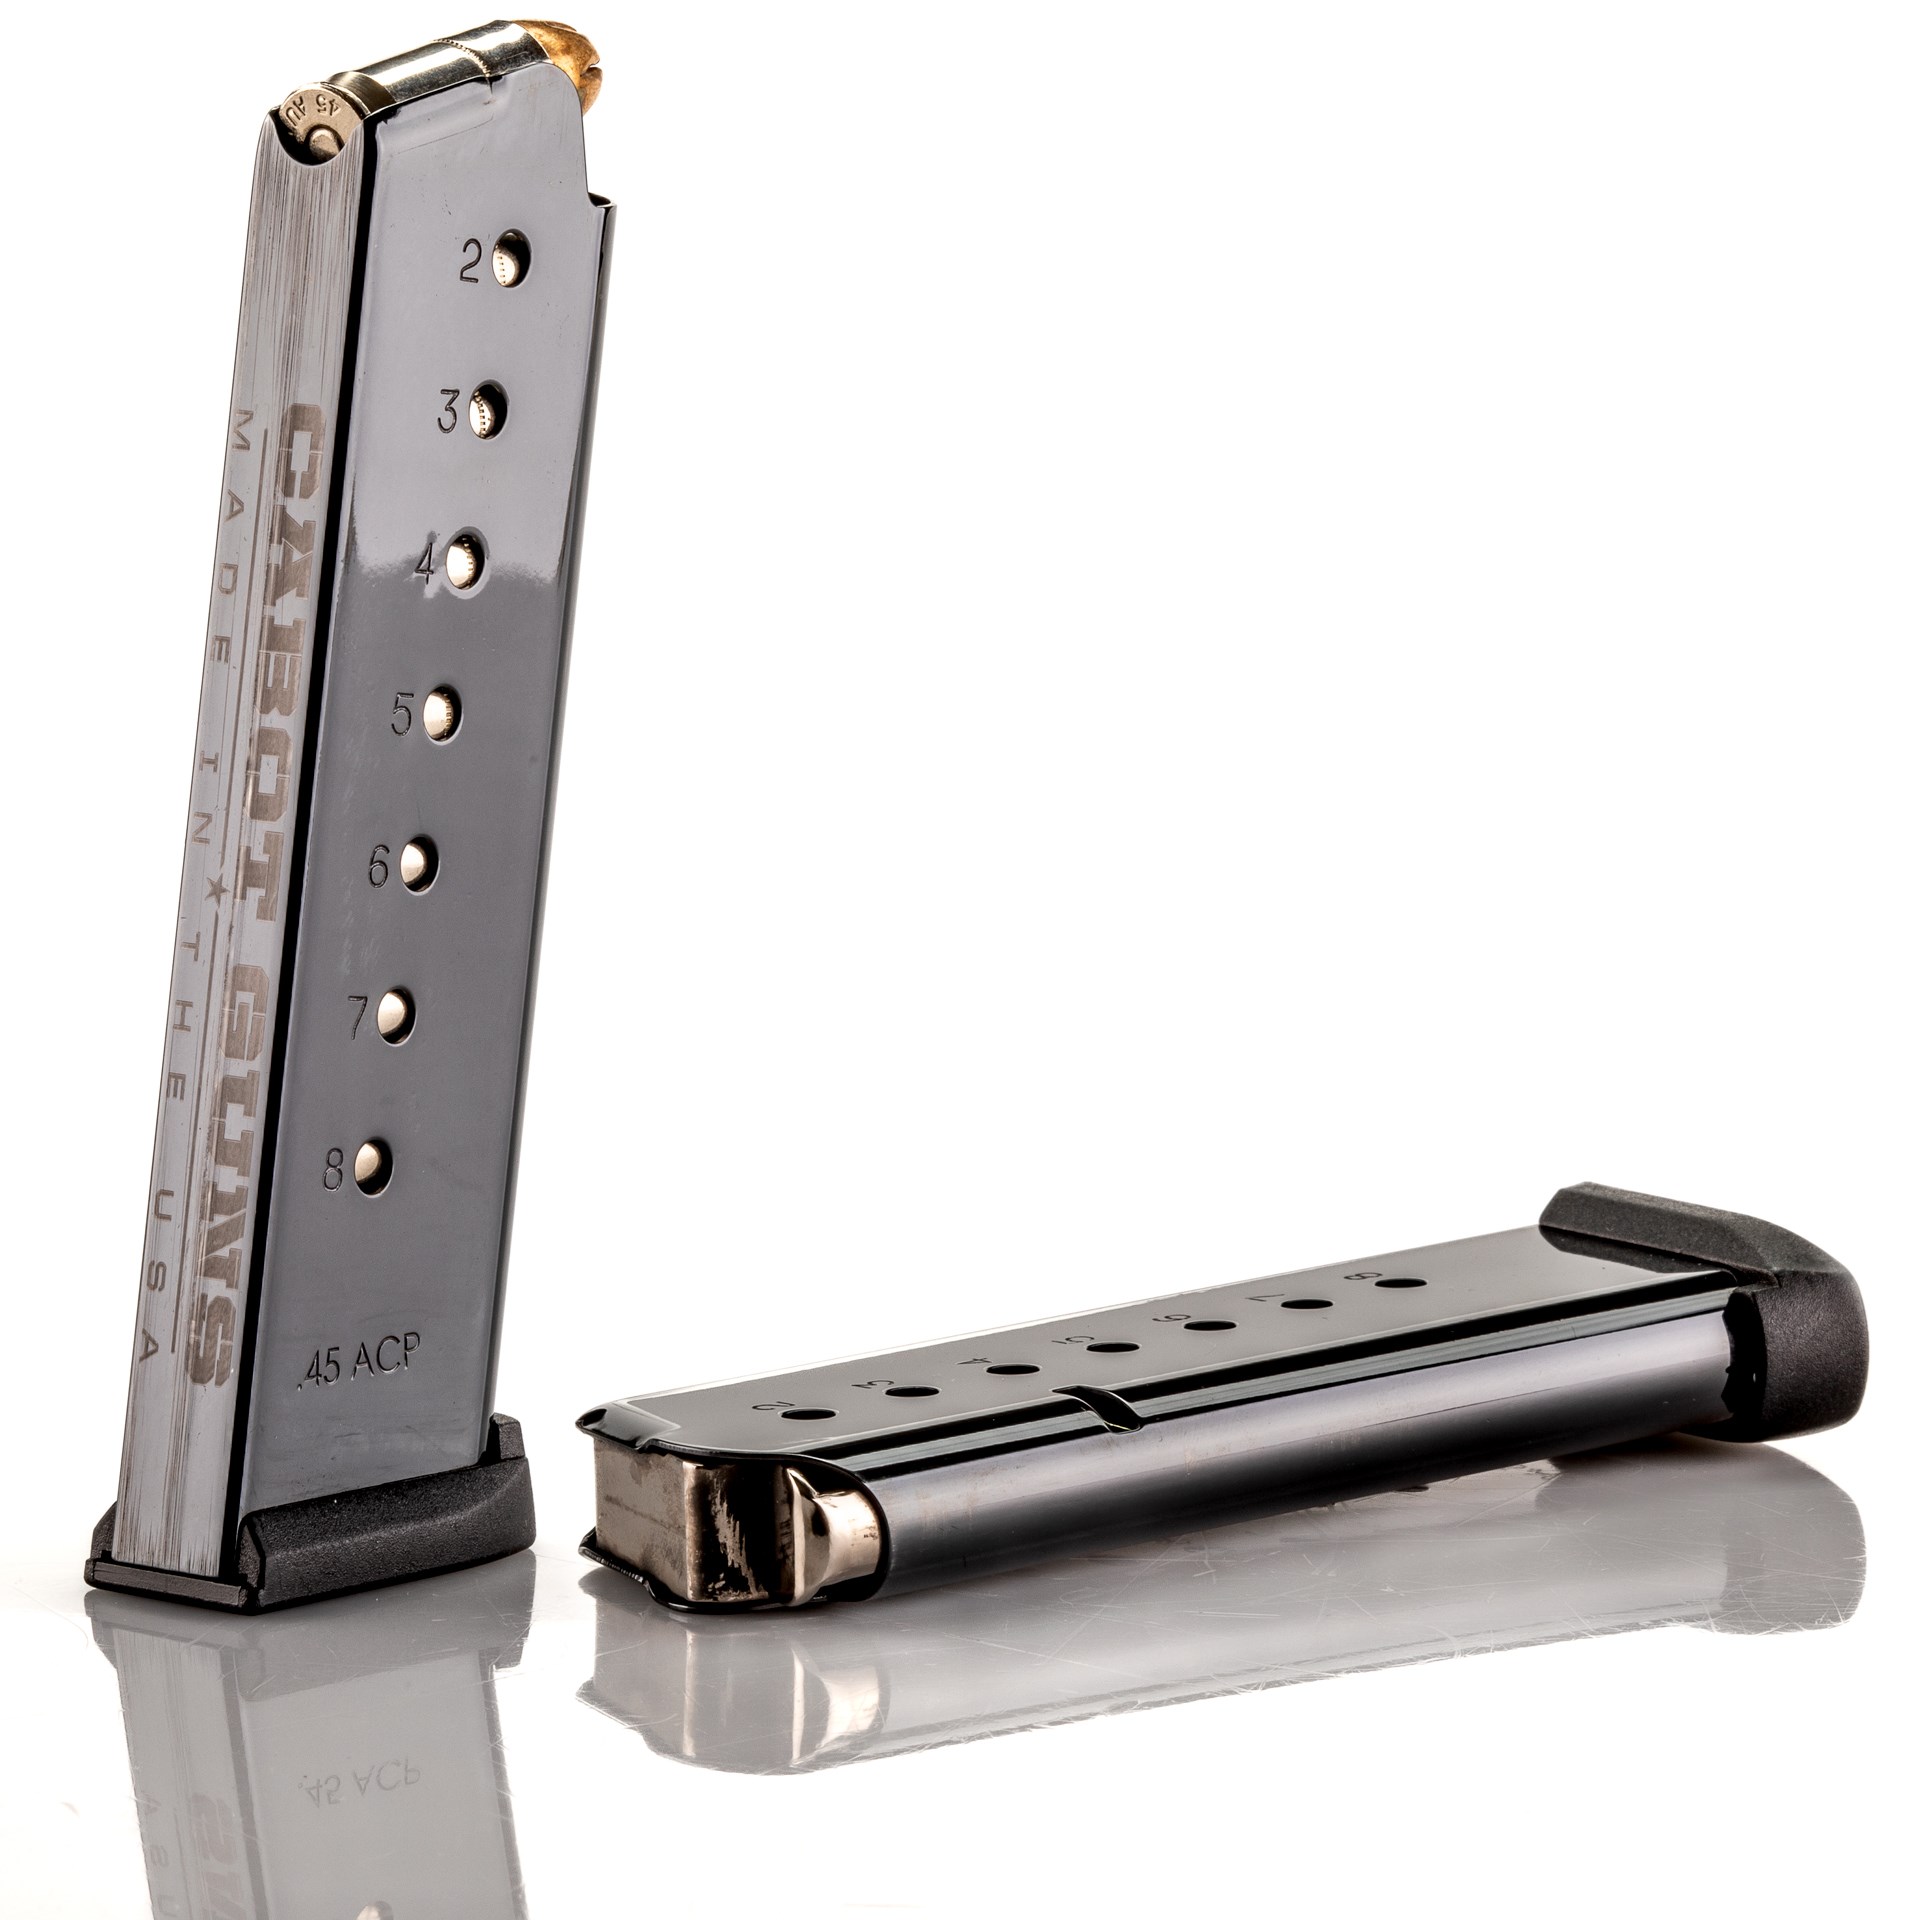 cabot guns southpaw m1911 pistol magazine ammunition vertical standing black steel horizontal laying down on white reflection on white table mirror-like appearance